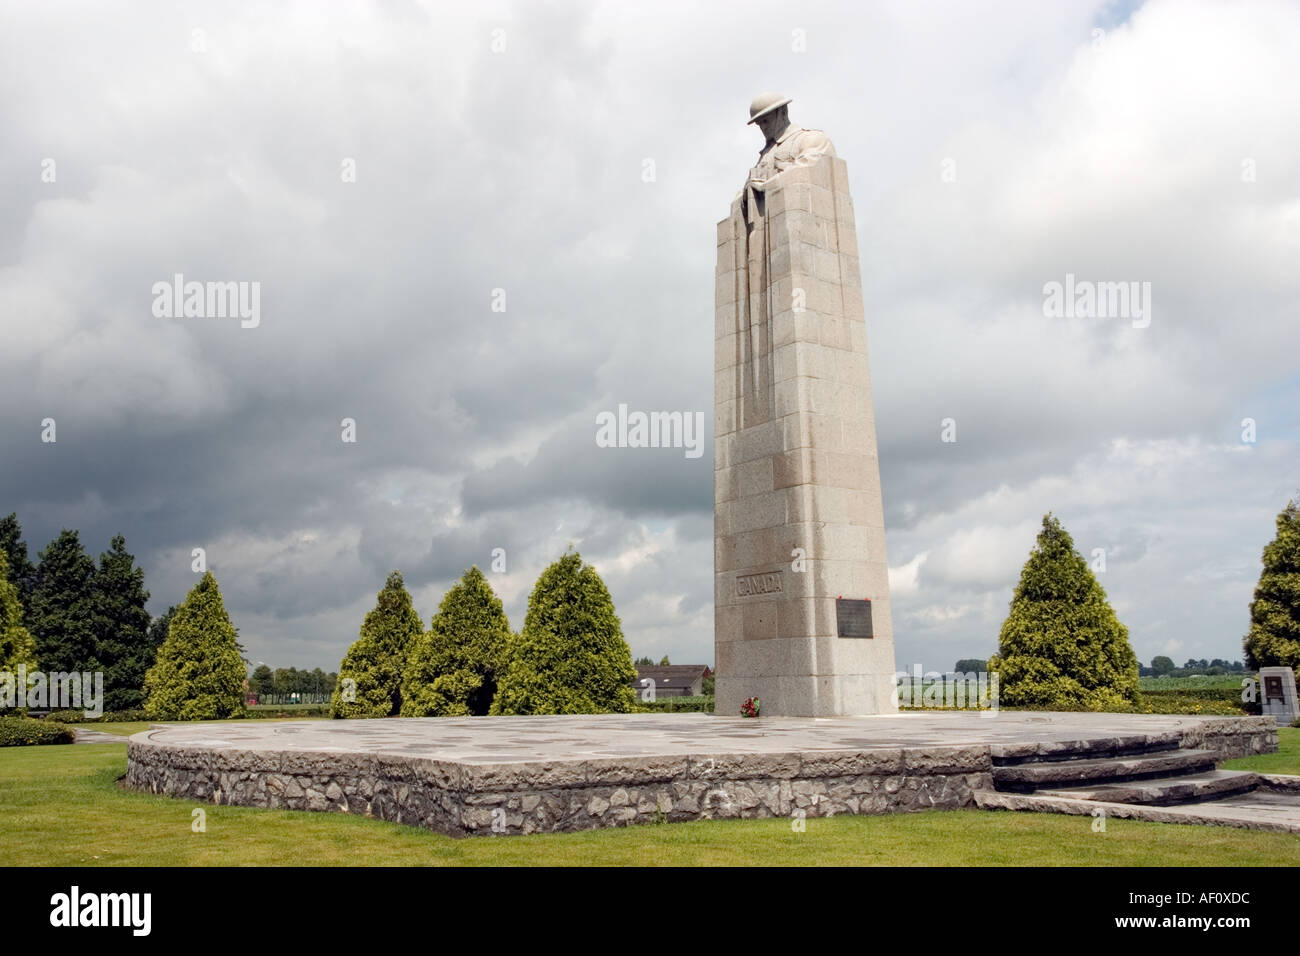 St Julien Memorial to WW1 Canadian soldiers who died in first gas attacks of the Great War St Juliaan Belgium Stock Photo